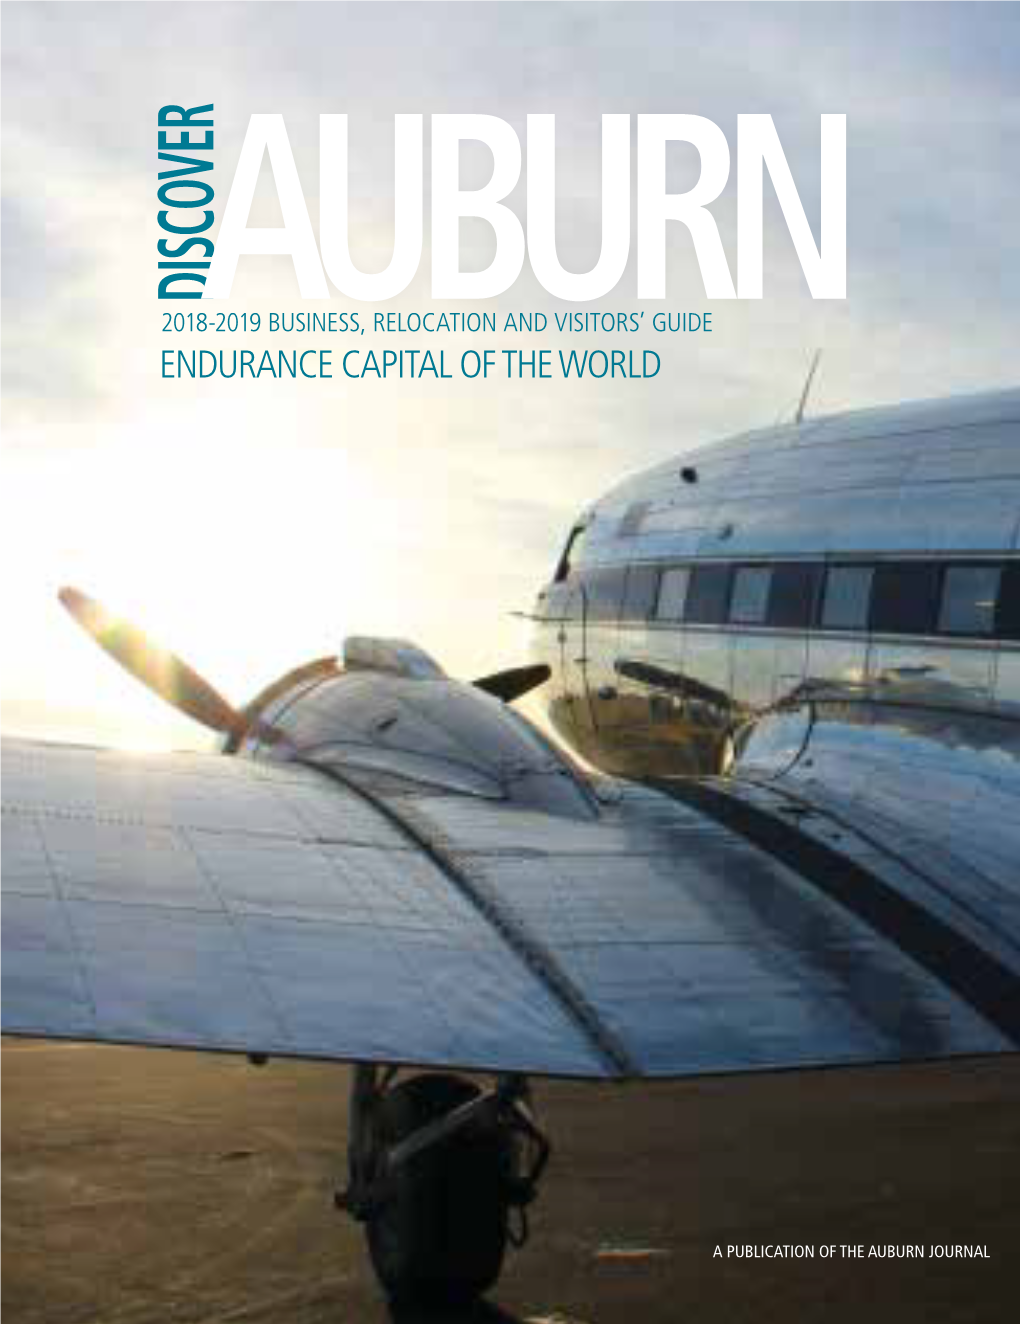 Discoverauburn Apital of Theworld Capital R S’ Guide a Publica Tion of the Auburn Journ Al Thank You Auburn for Voting Us Best of the Best Again!